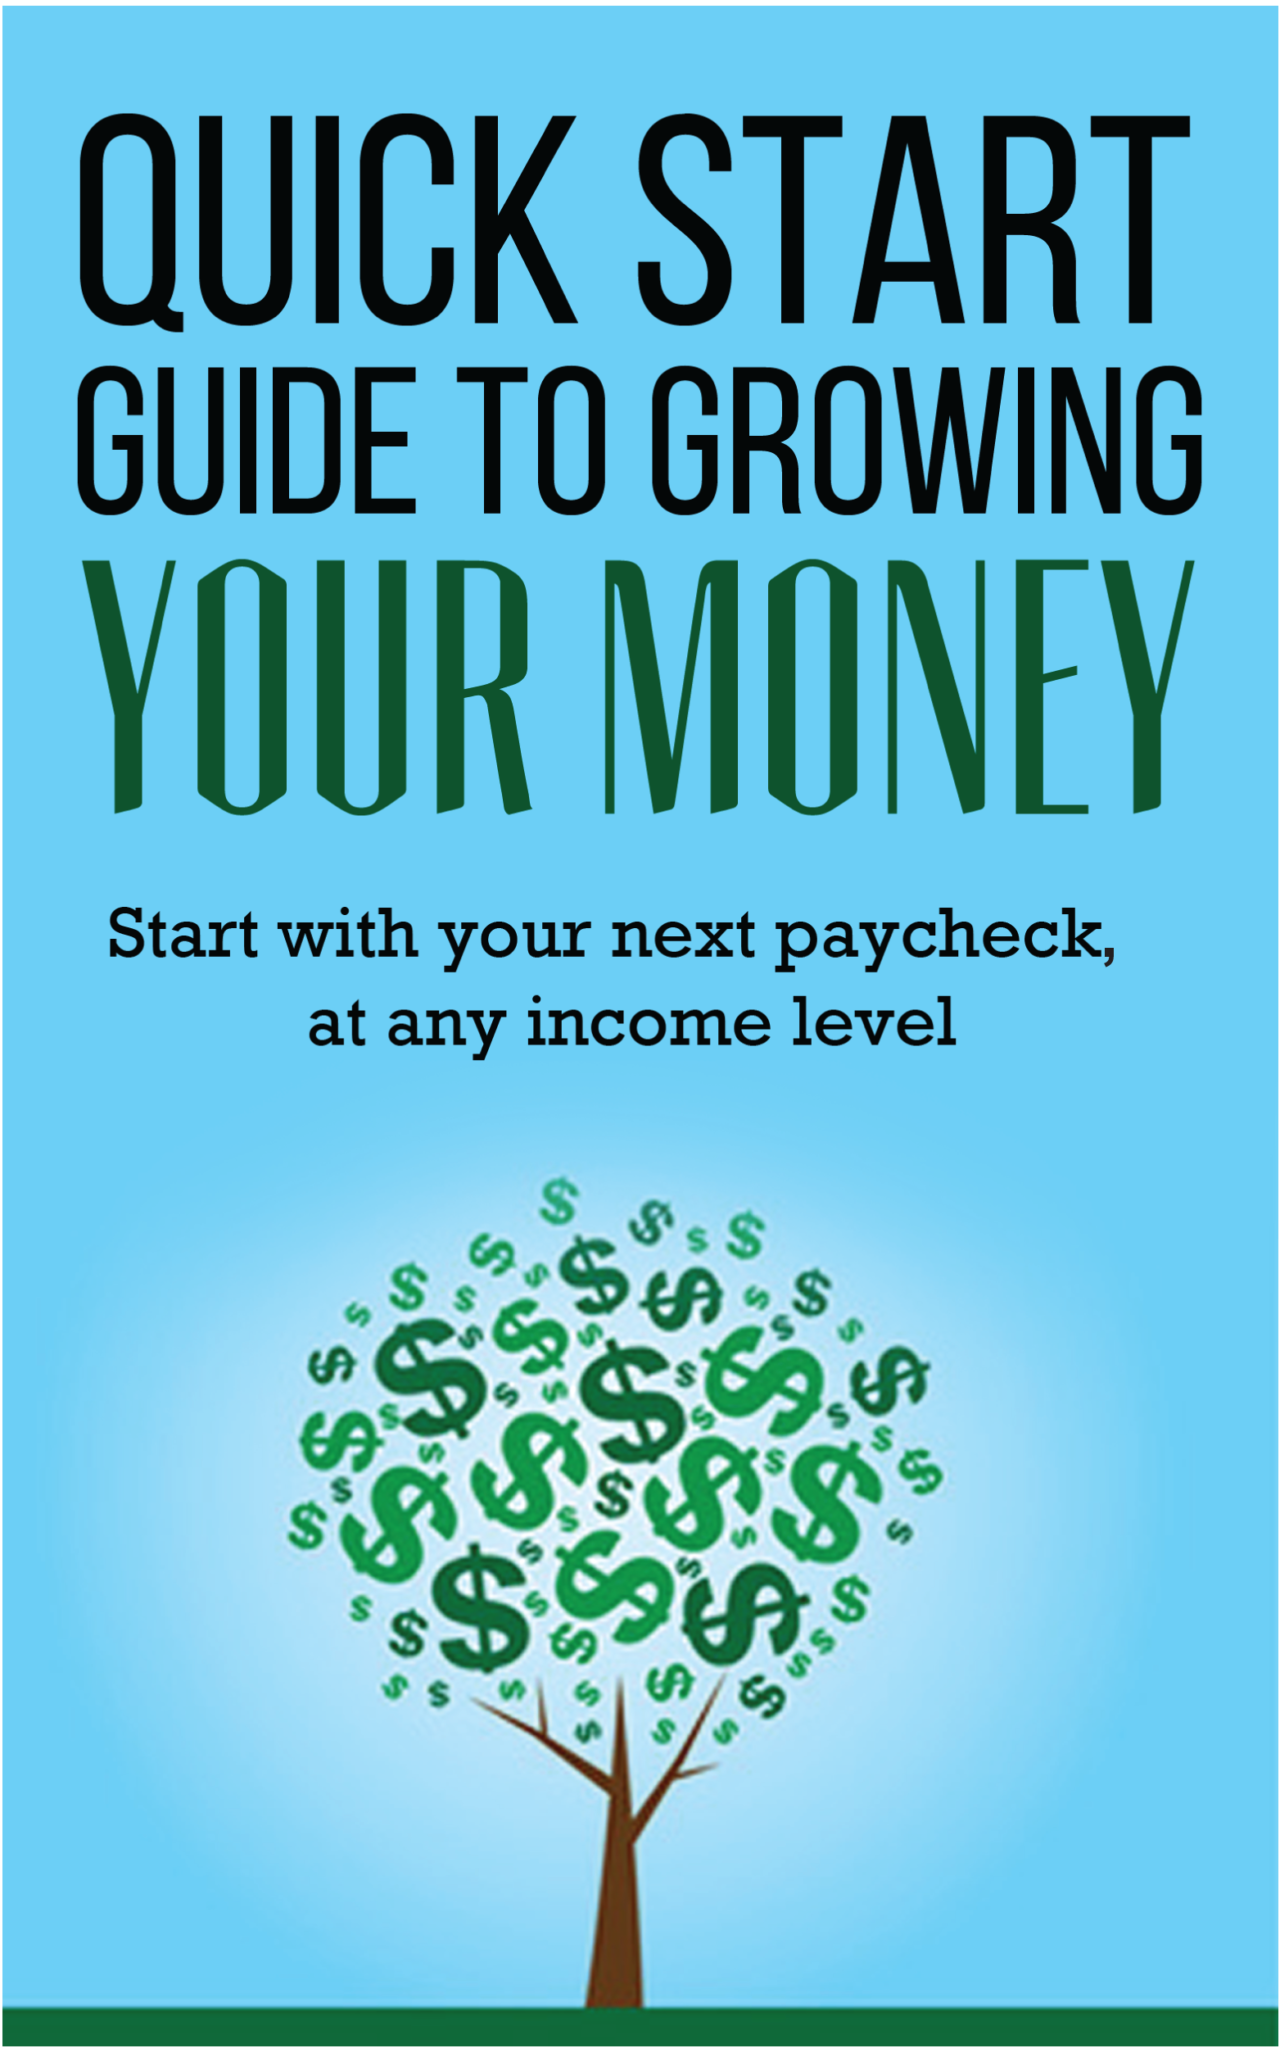 FREE: Quick Start Guide to Growing Your Money: Start with your next paycheck, at any income level by Alex